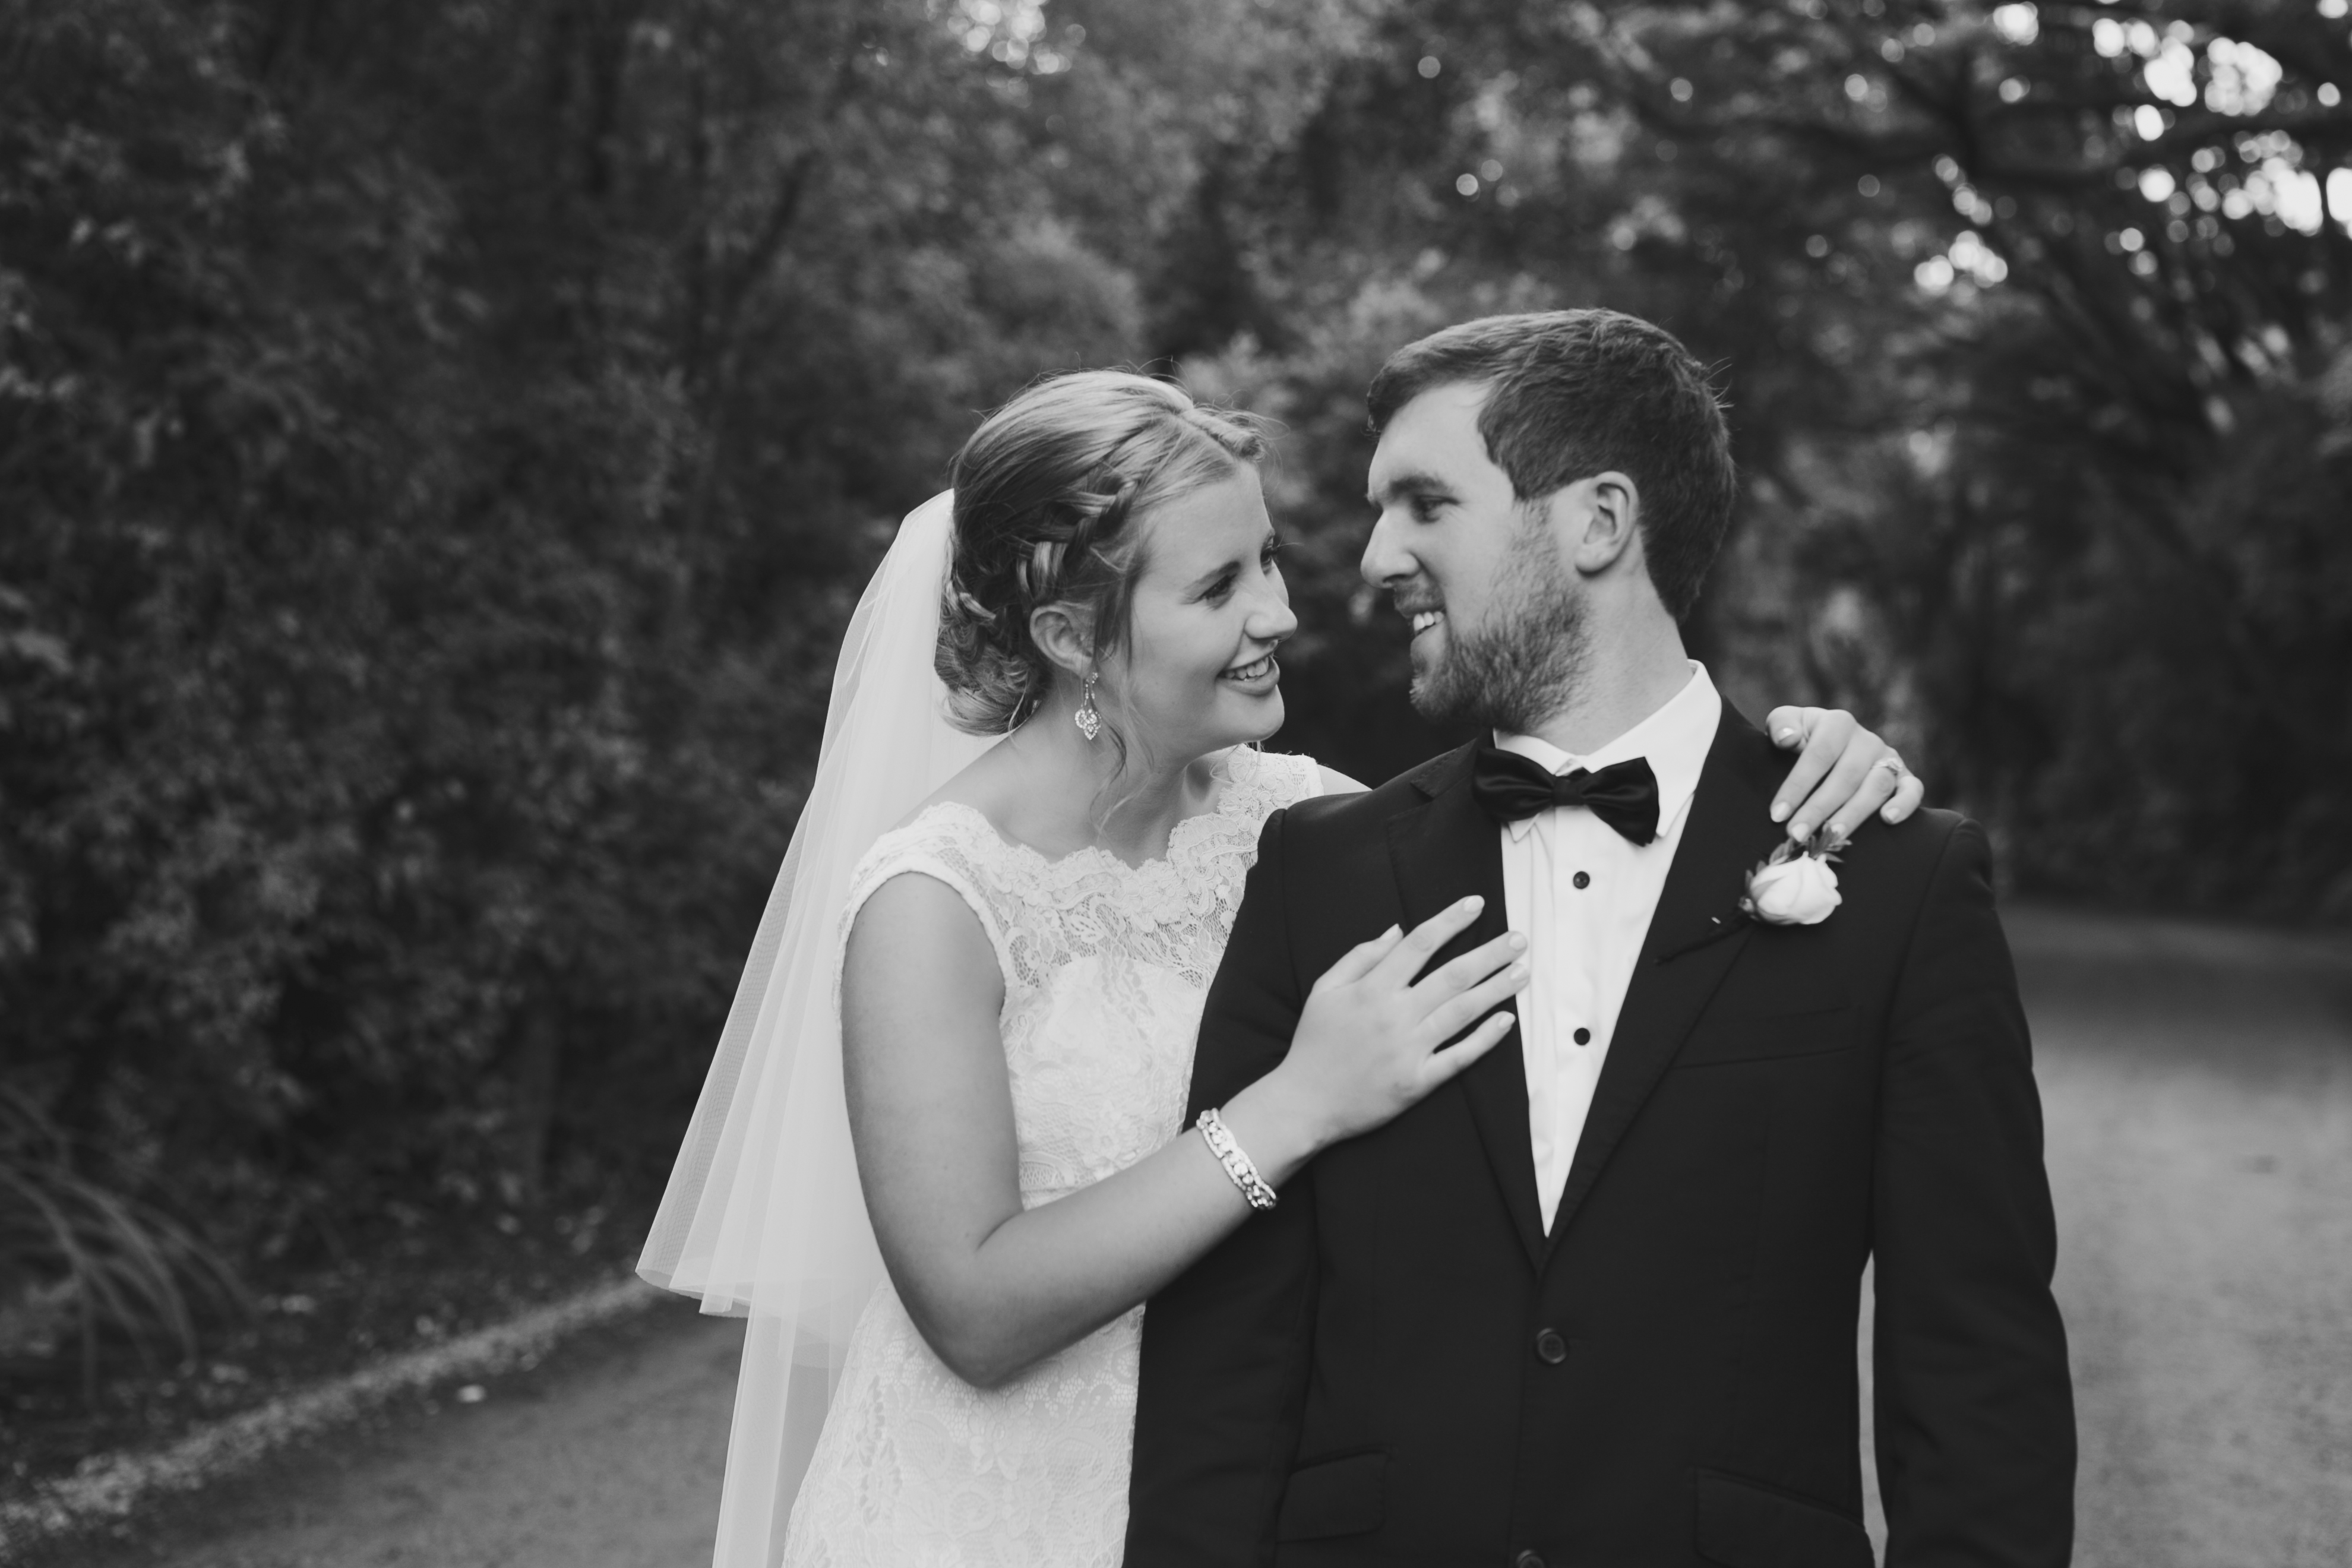 Read all about our dreamy wedding on a 10k budget. It's not hard to cut costs and still have a perfect day.